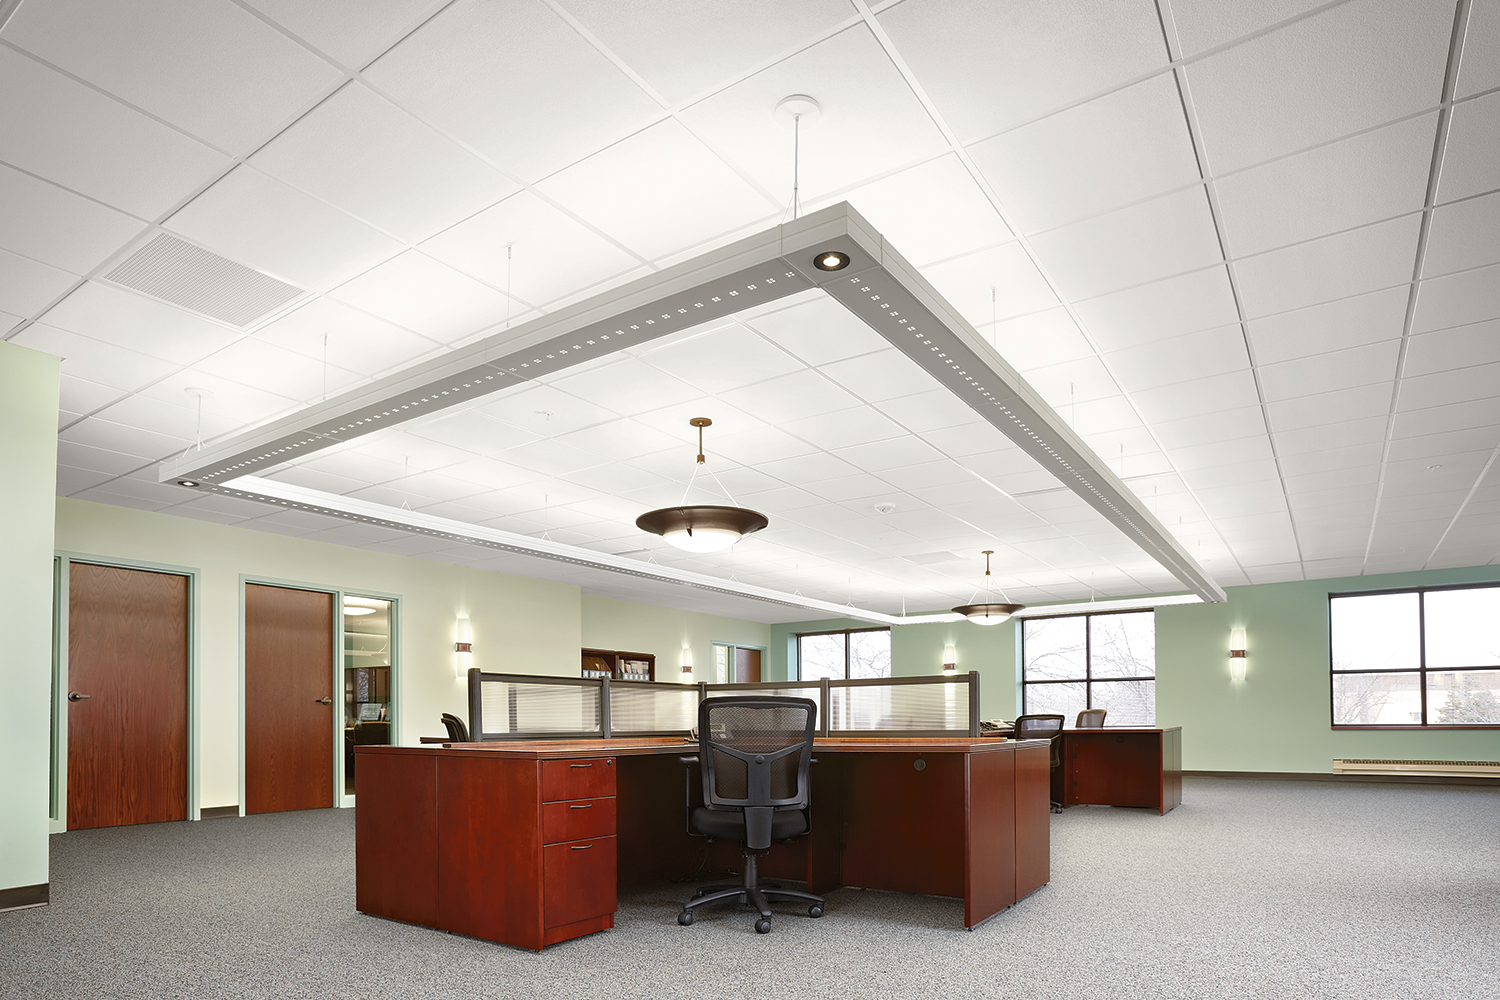 Infinity Performance large linear suspended luminaires in a rectangular configuration above an open office with Pila sconces.